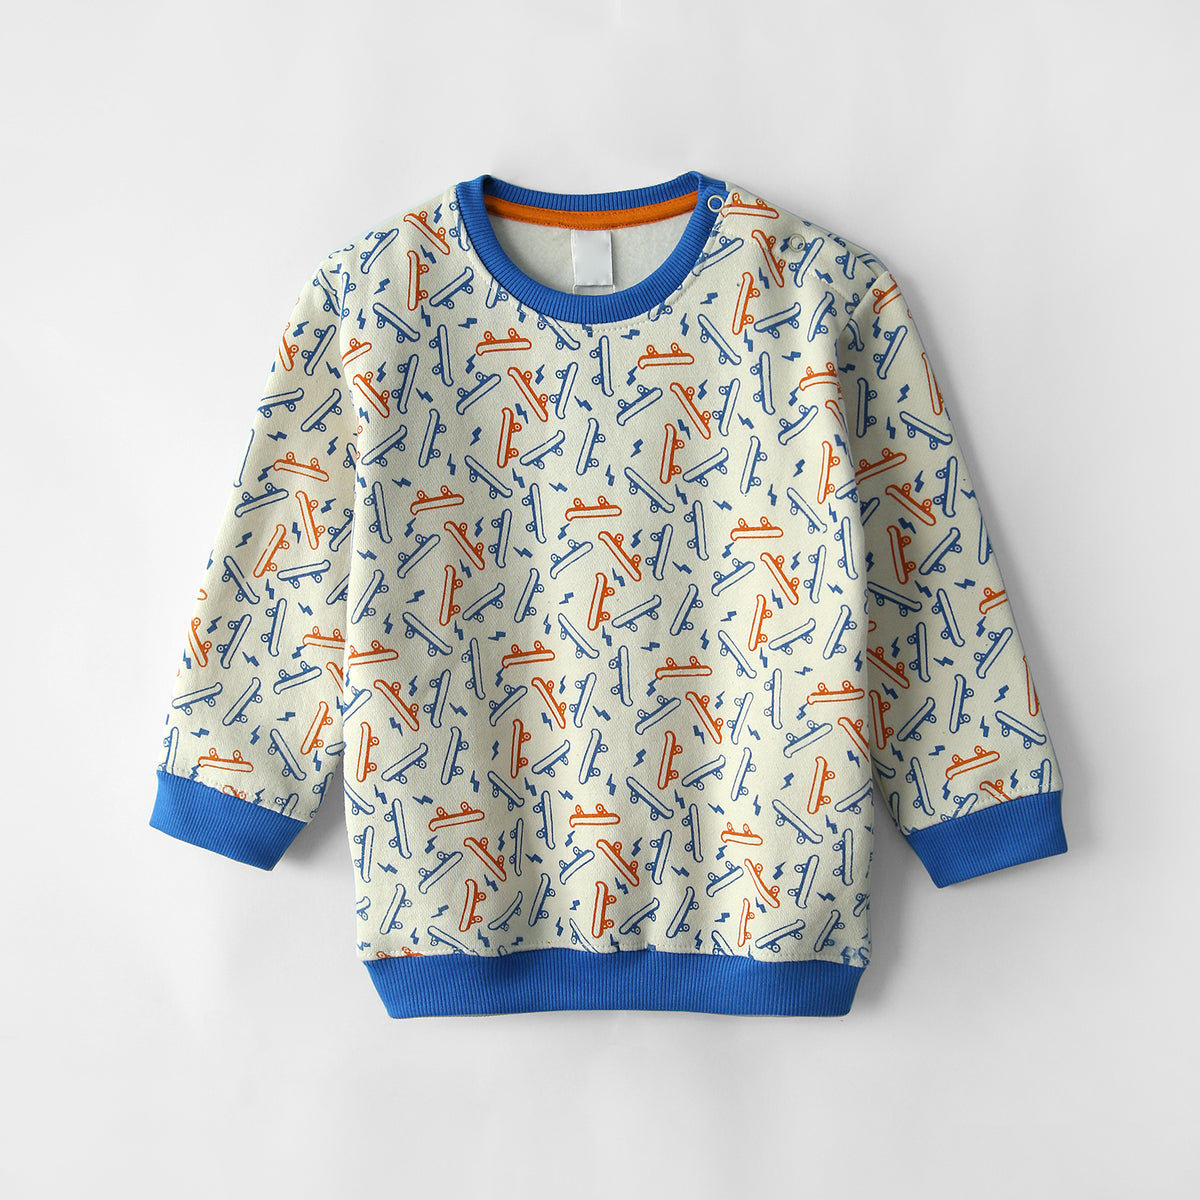 Kids Premium Quality All-Over Printed Sweatshirt With Shoulder Snap Button